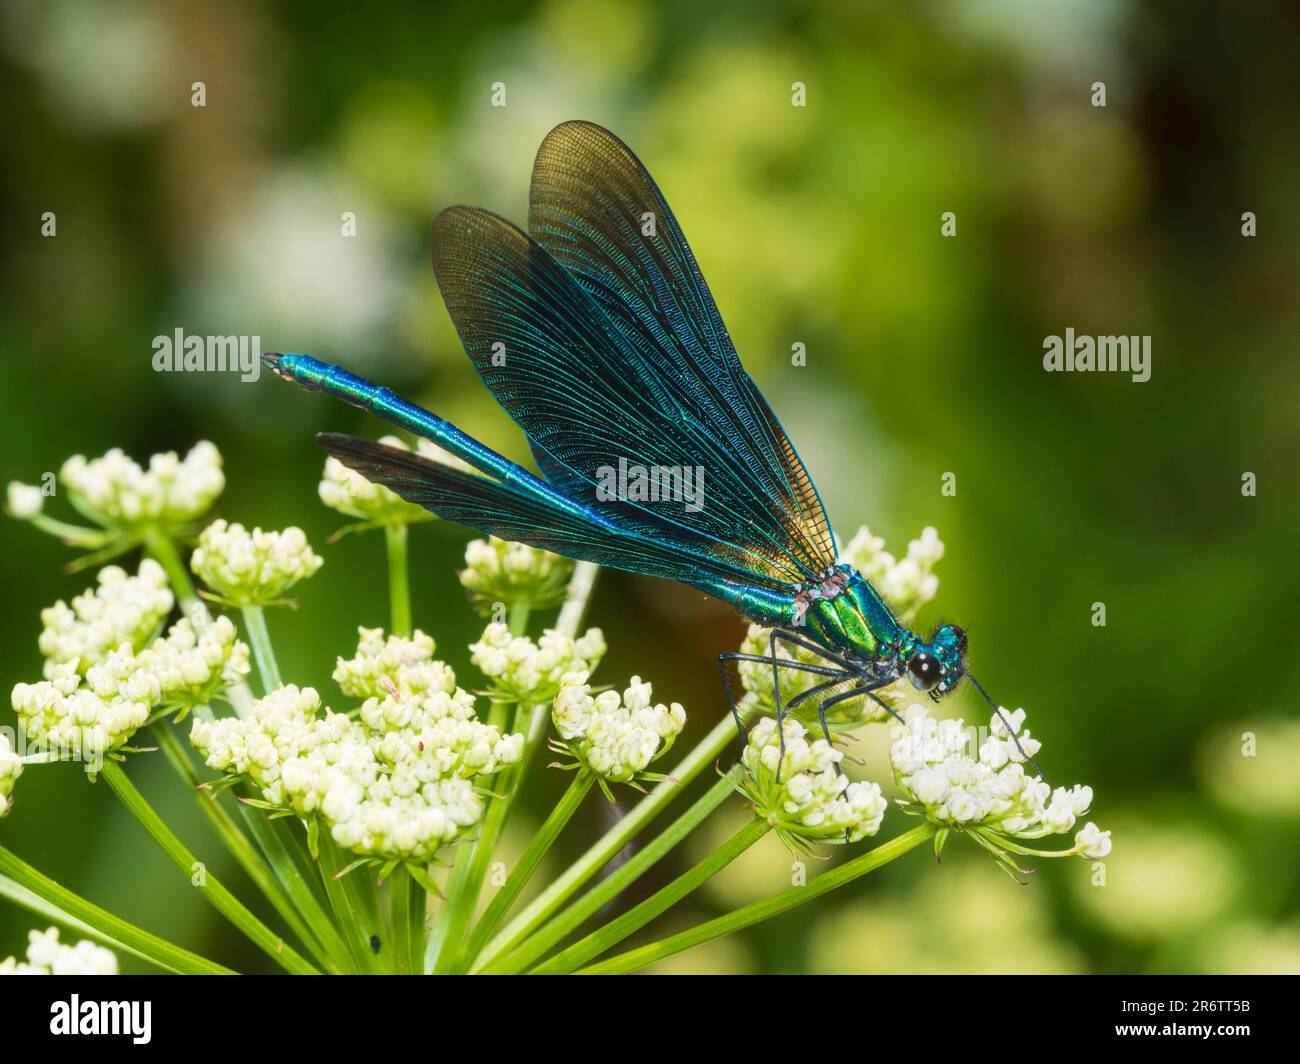 Iridescent blue and green colouration of a mature male beautiful demoiselle, Calopteryx virgo, in a Dartmoor, UK, garden Stock Photo